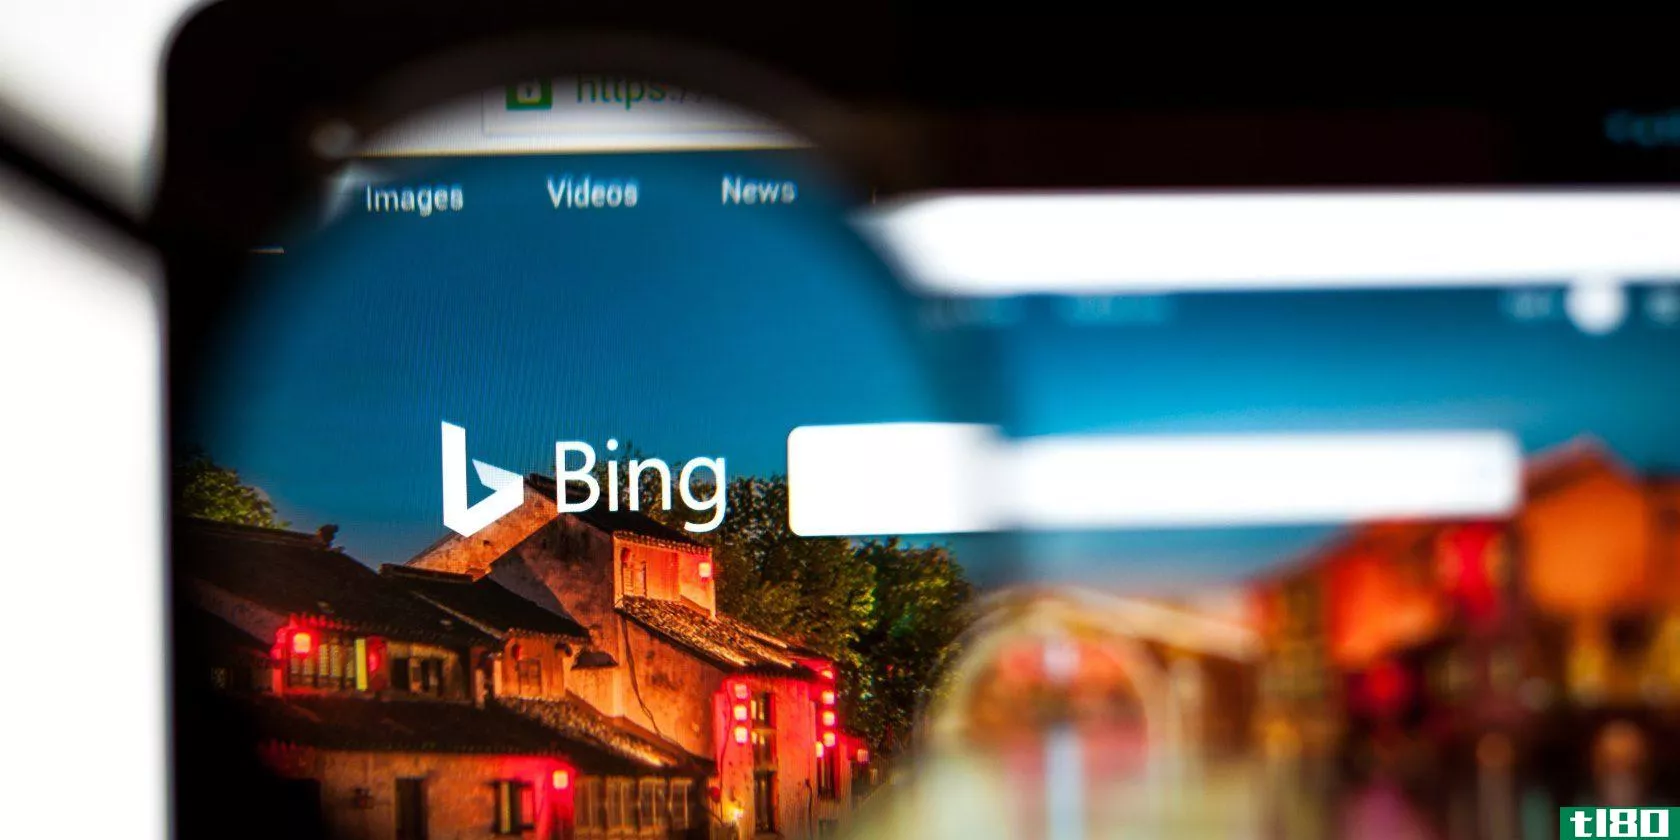 The Bing webpage and logo